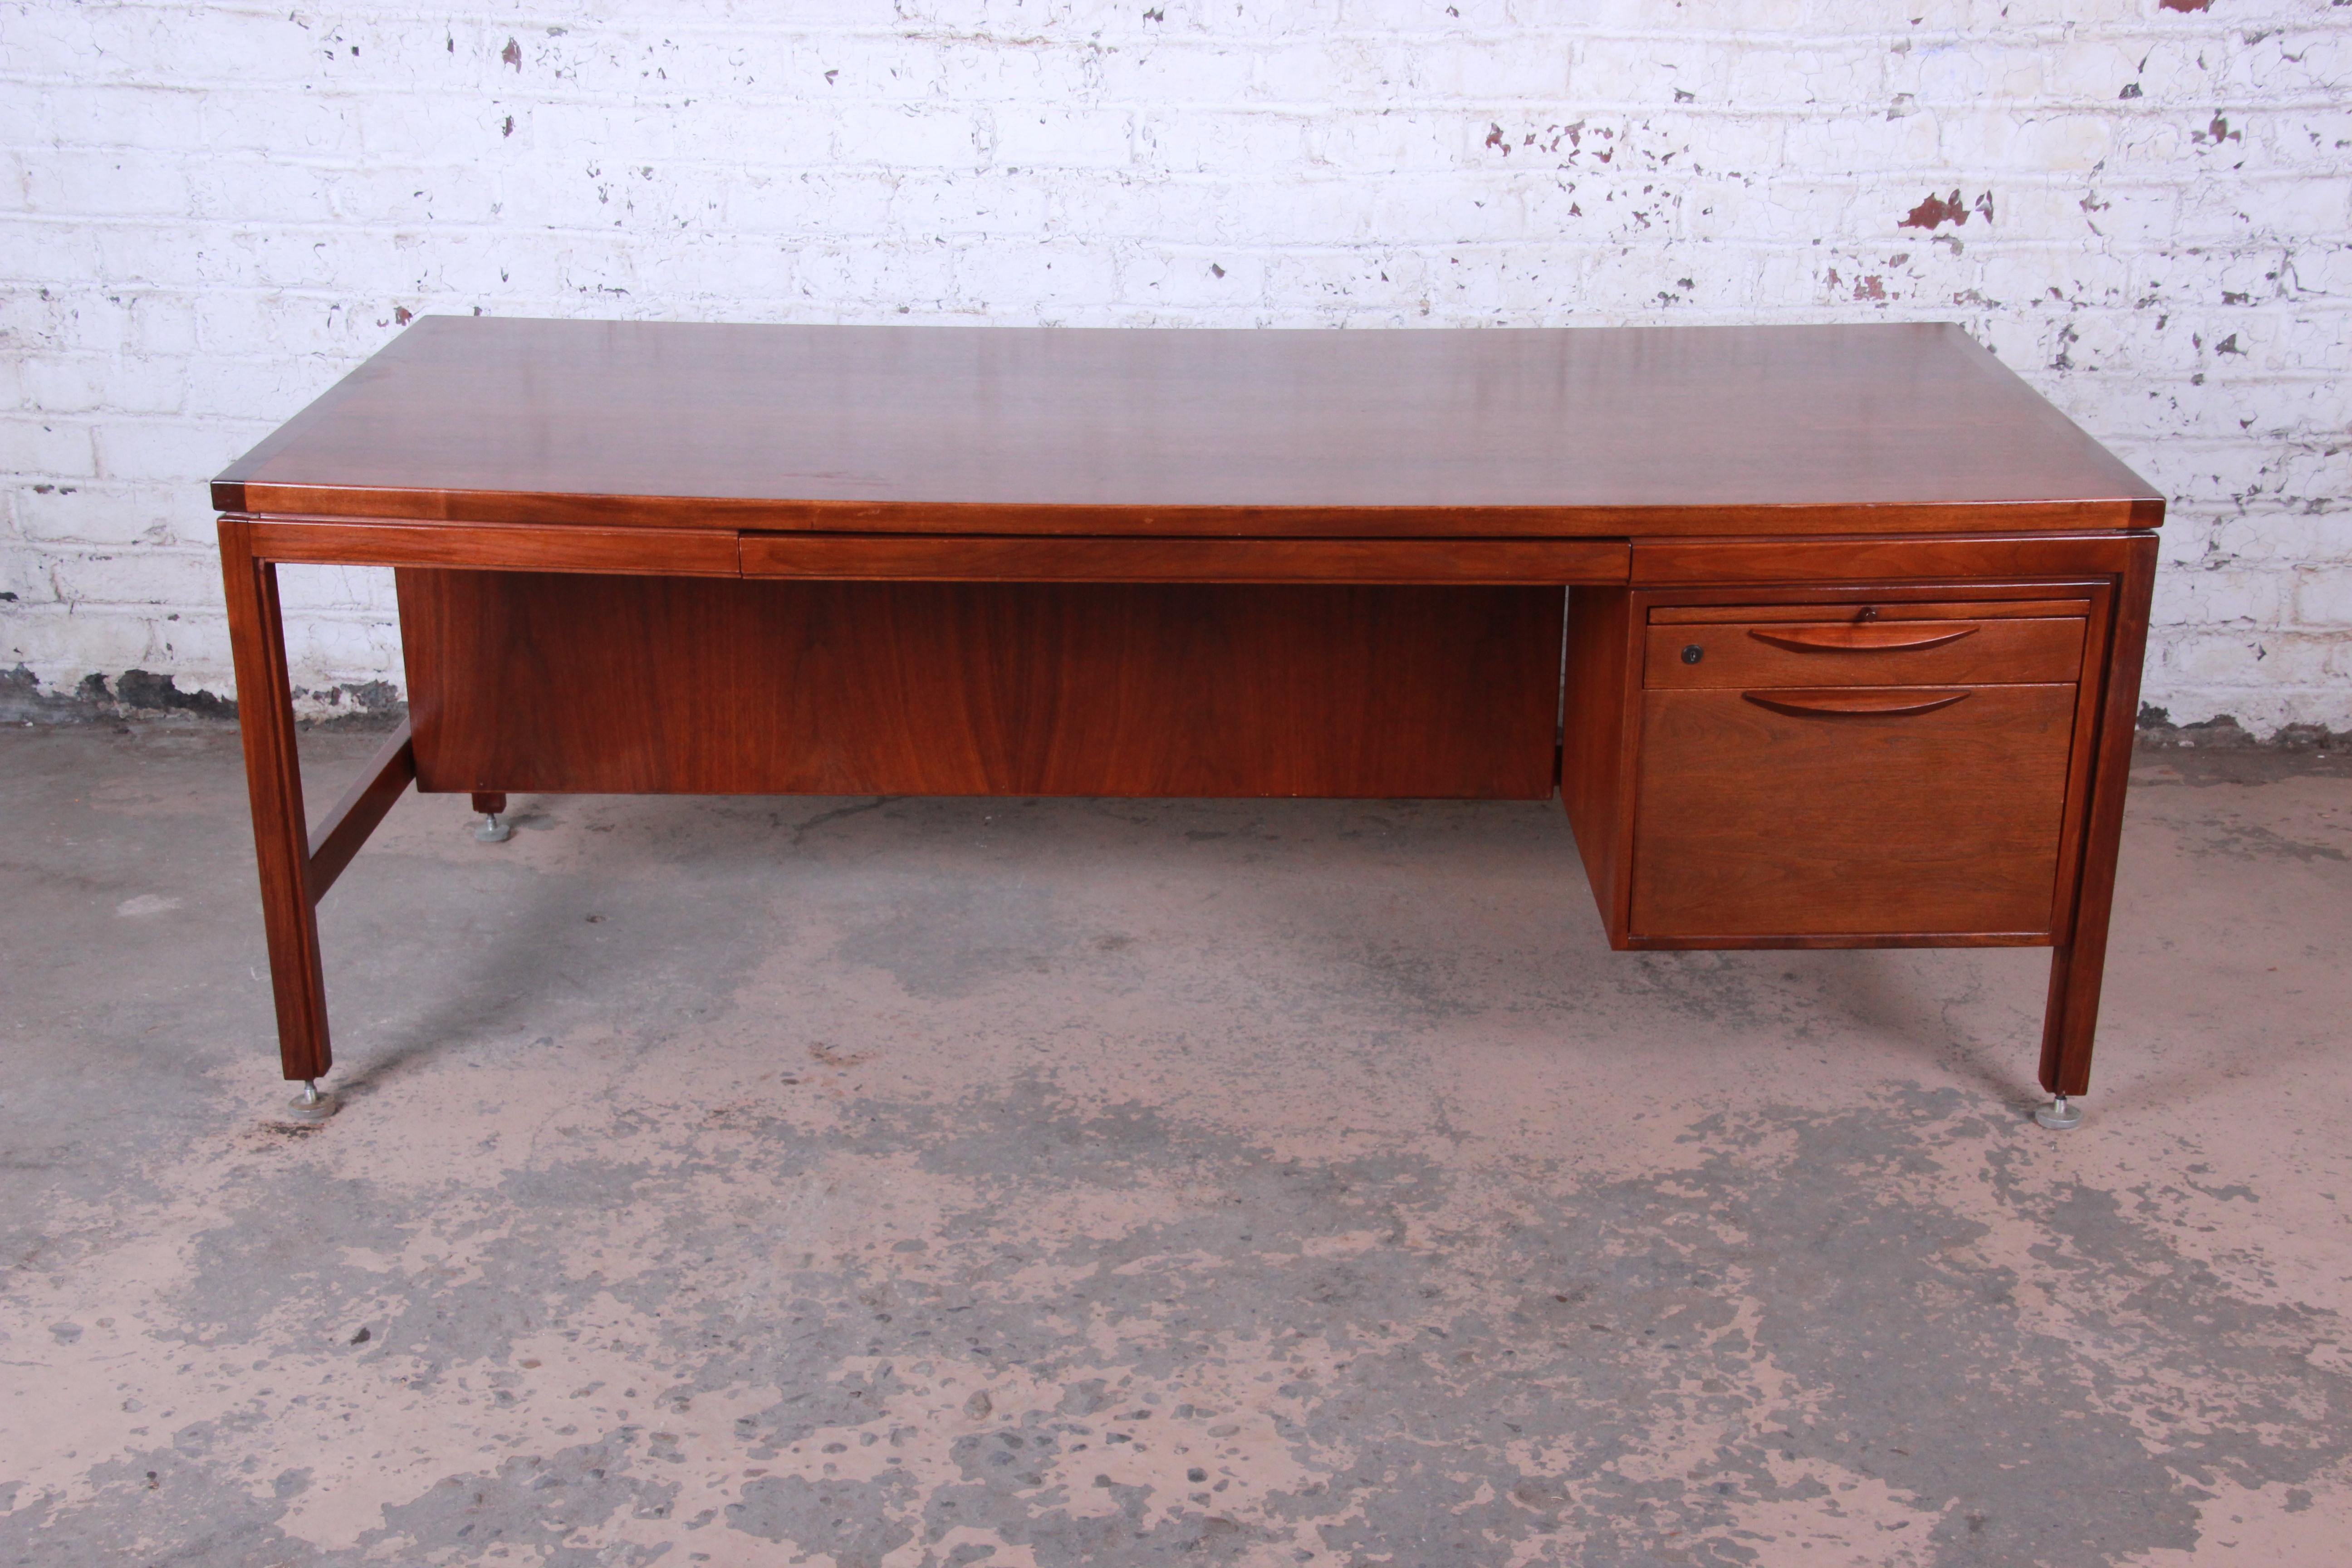 An exceptional Mid-Century Modern walnut executive desk designed by Jens Risom. The desk features gorgeous walnut wood grain and sleek Minimalist design. It offers good storage with two drawers, a pencil drawer, and a pull-out surface. Height can be